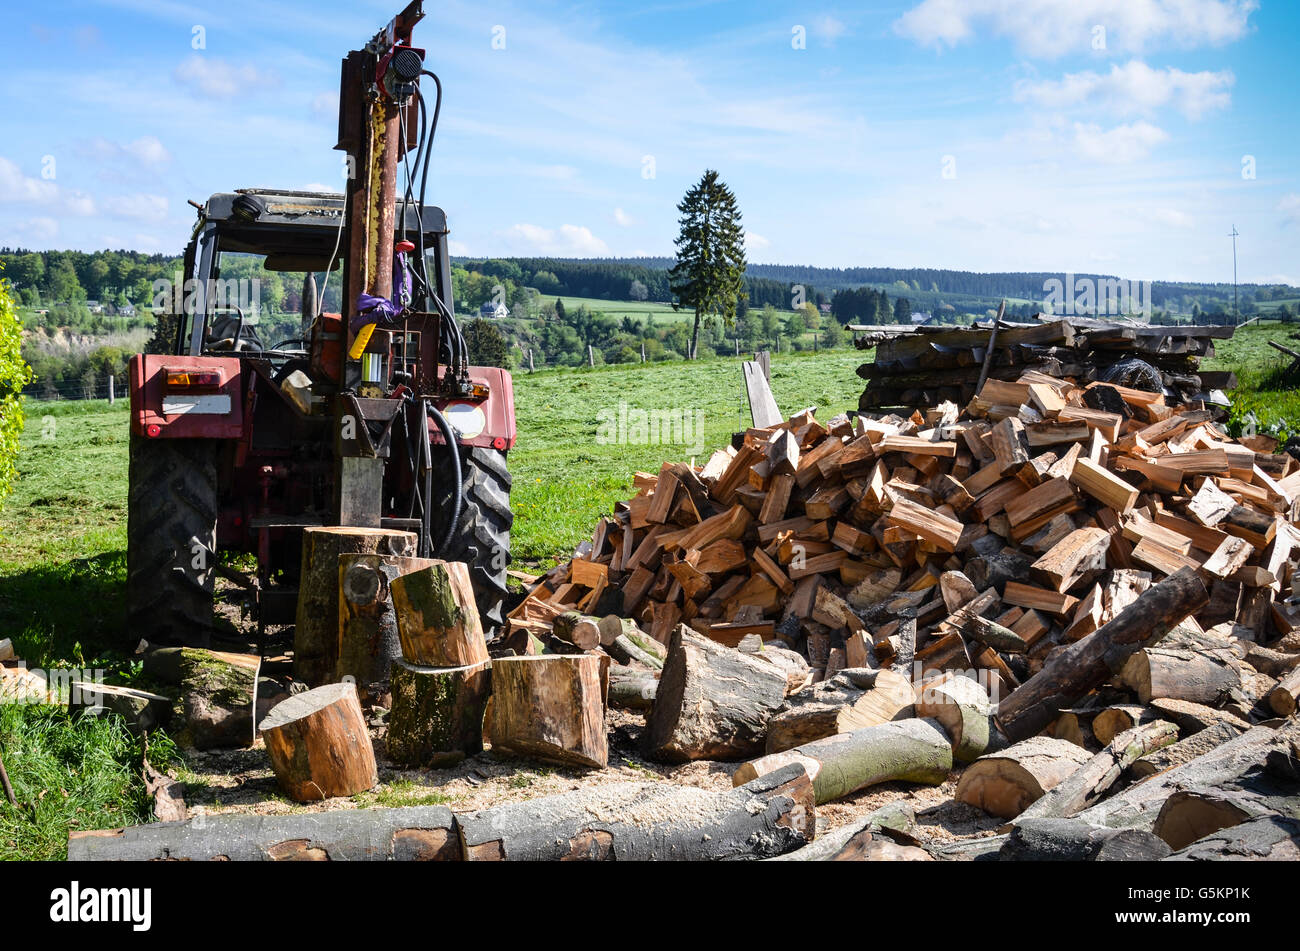 Old tractor with hydraulic powered log splitter and pile of firewood Stock Photo